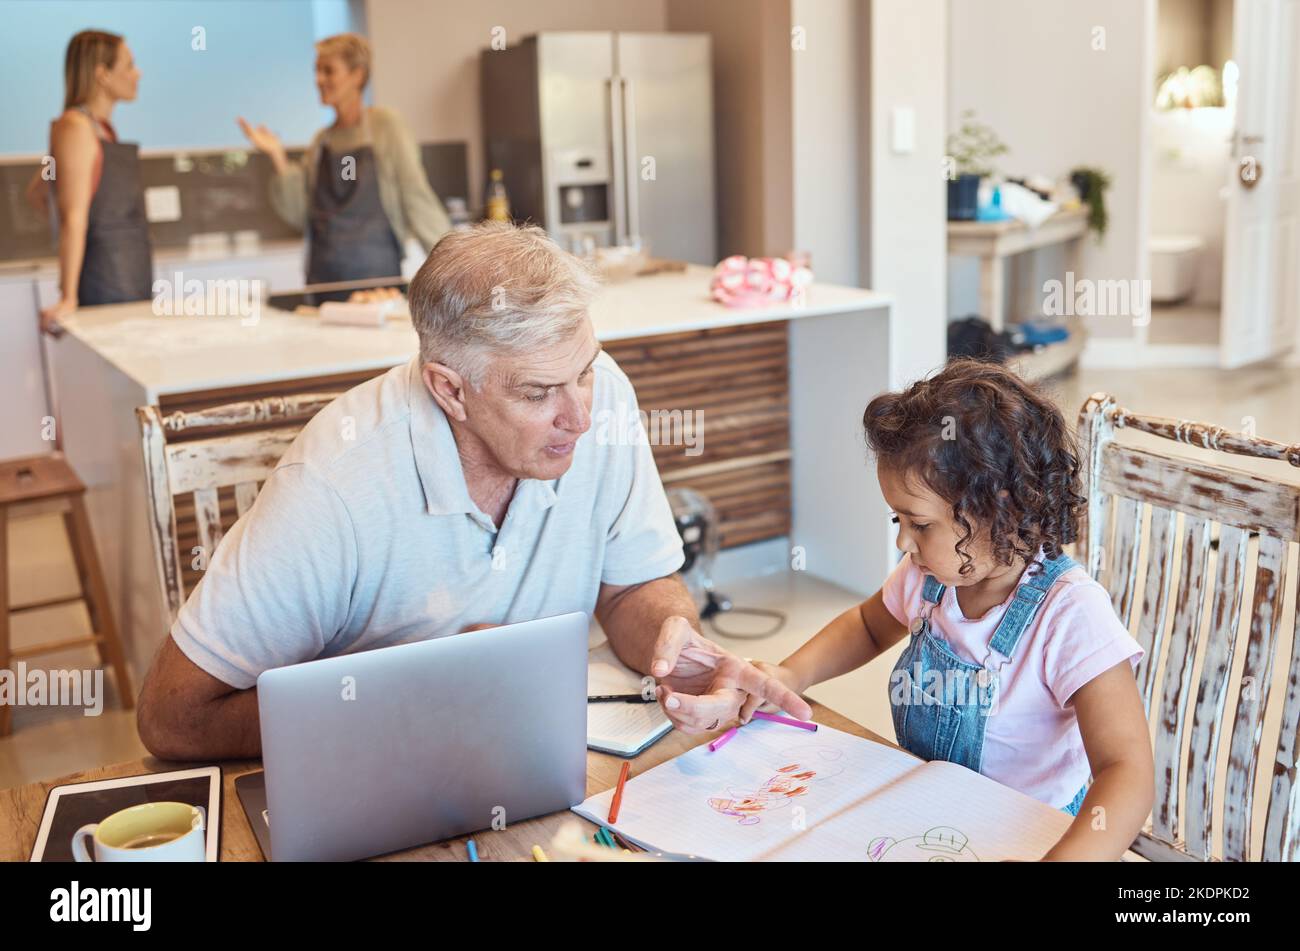 Learning, girl drawing and grandpa care in a kitchen remote working with a kid at home. Family, creative coloring and youth education development of a Stock Photo